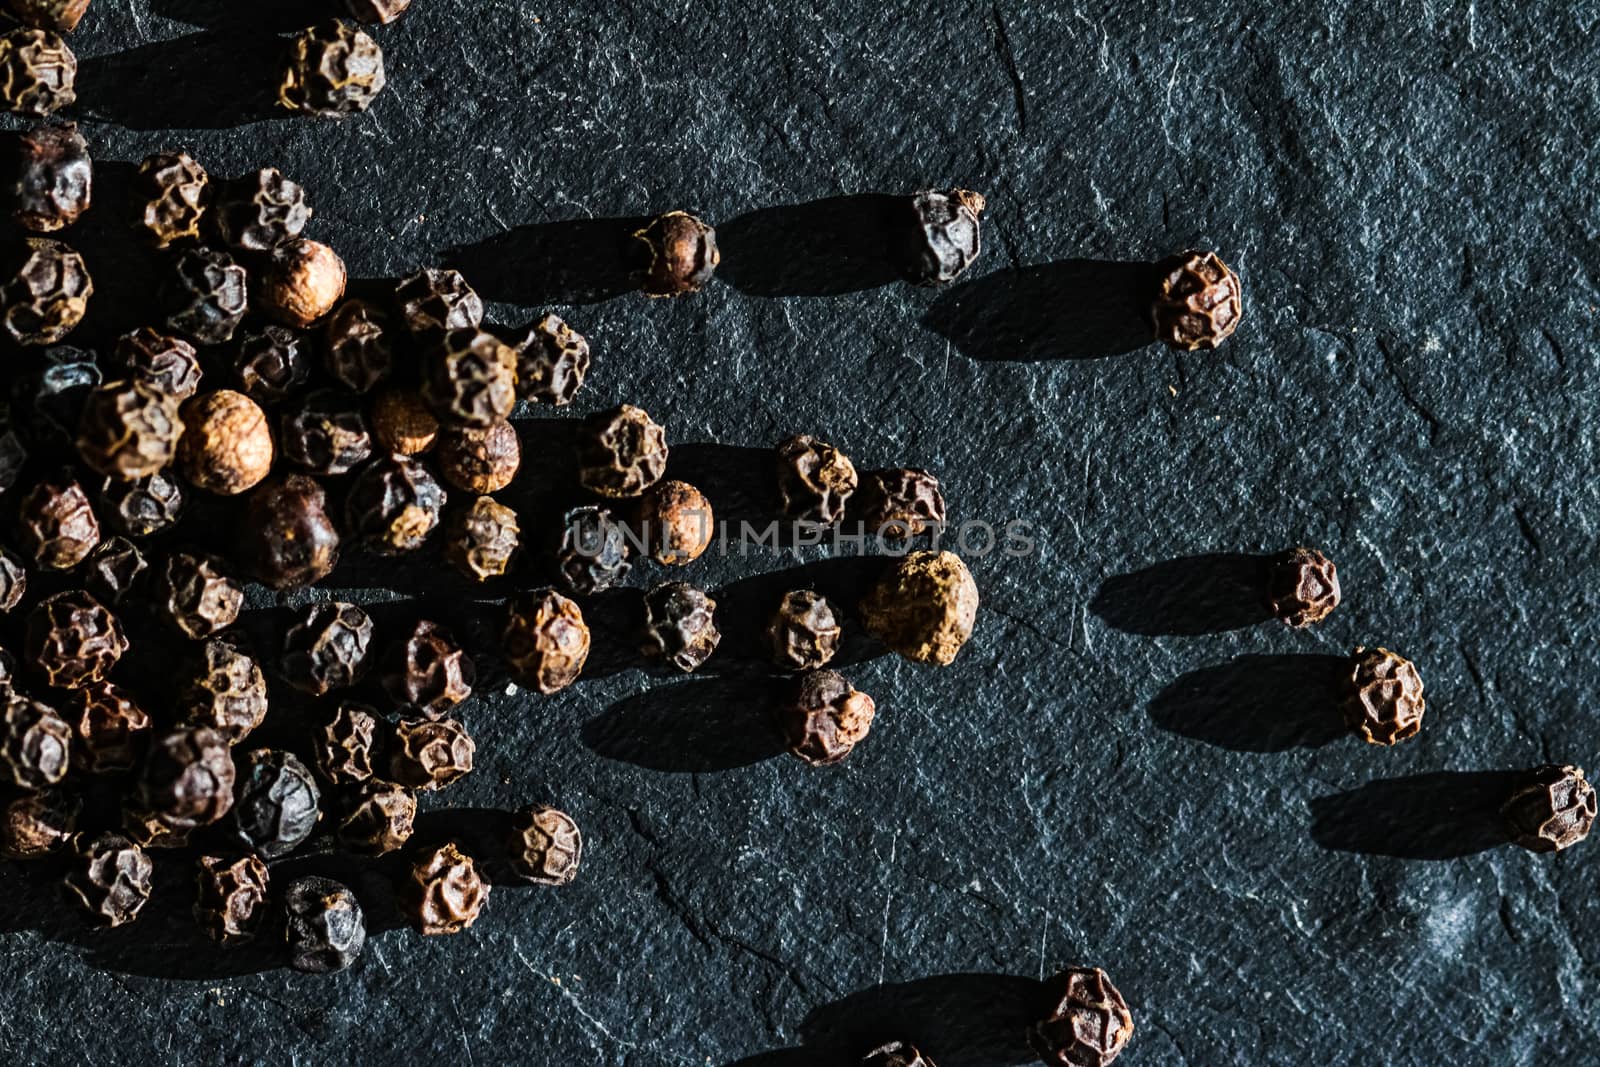 Black pepper closeup on luxury stone background as flat lay, dry food spices and recipe ingredients